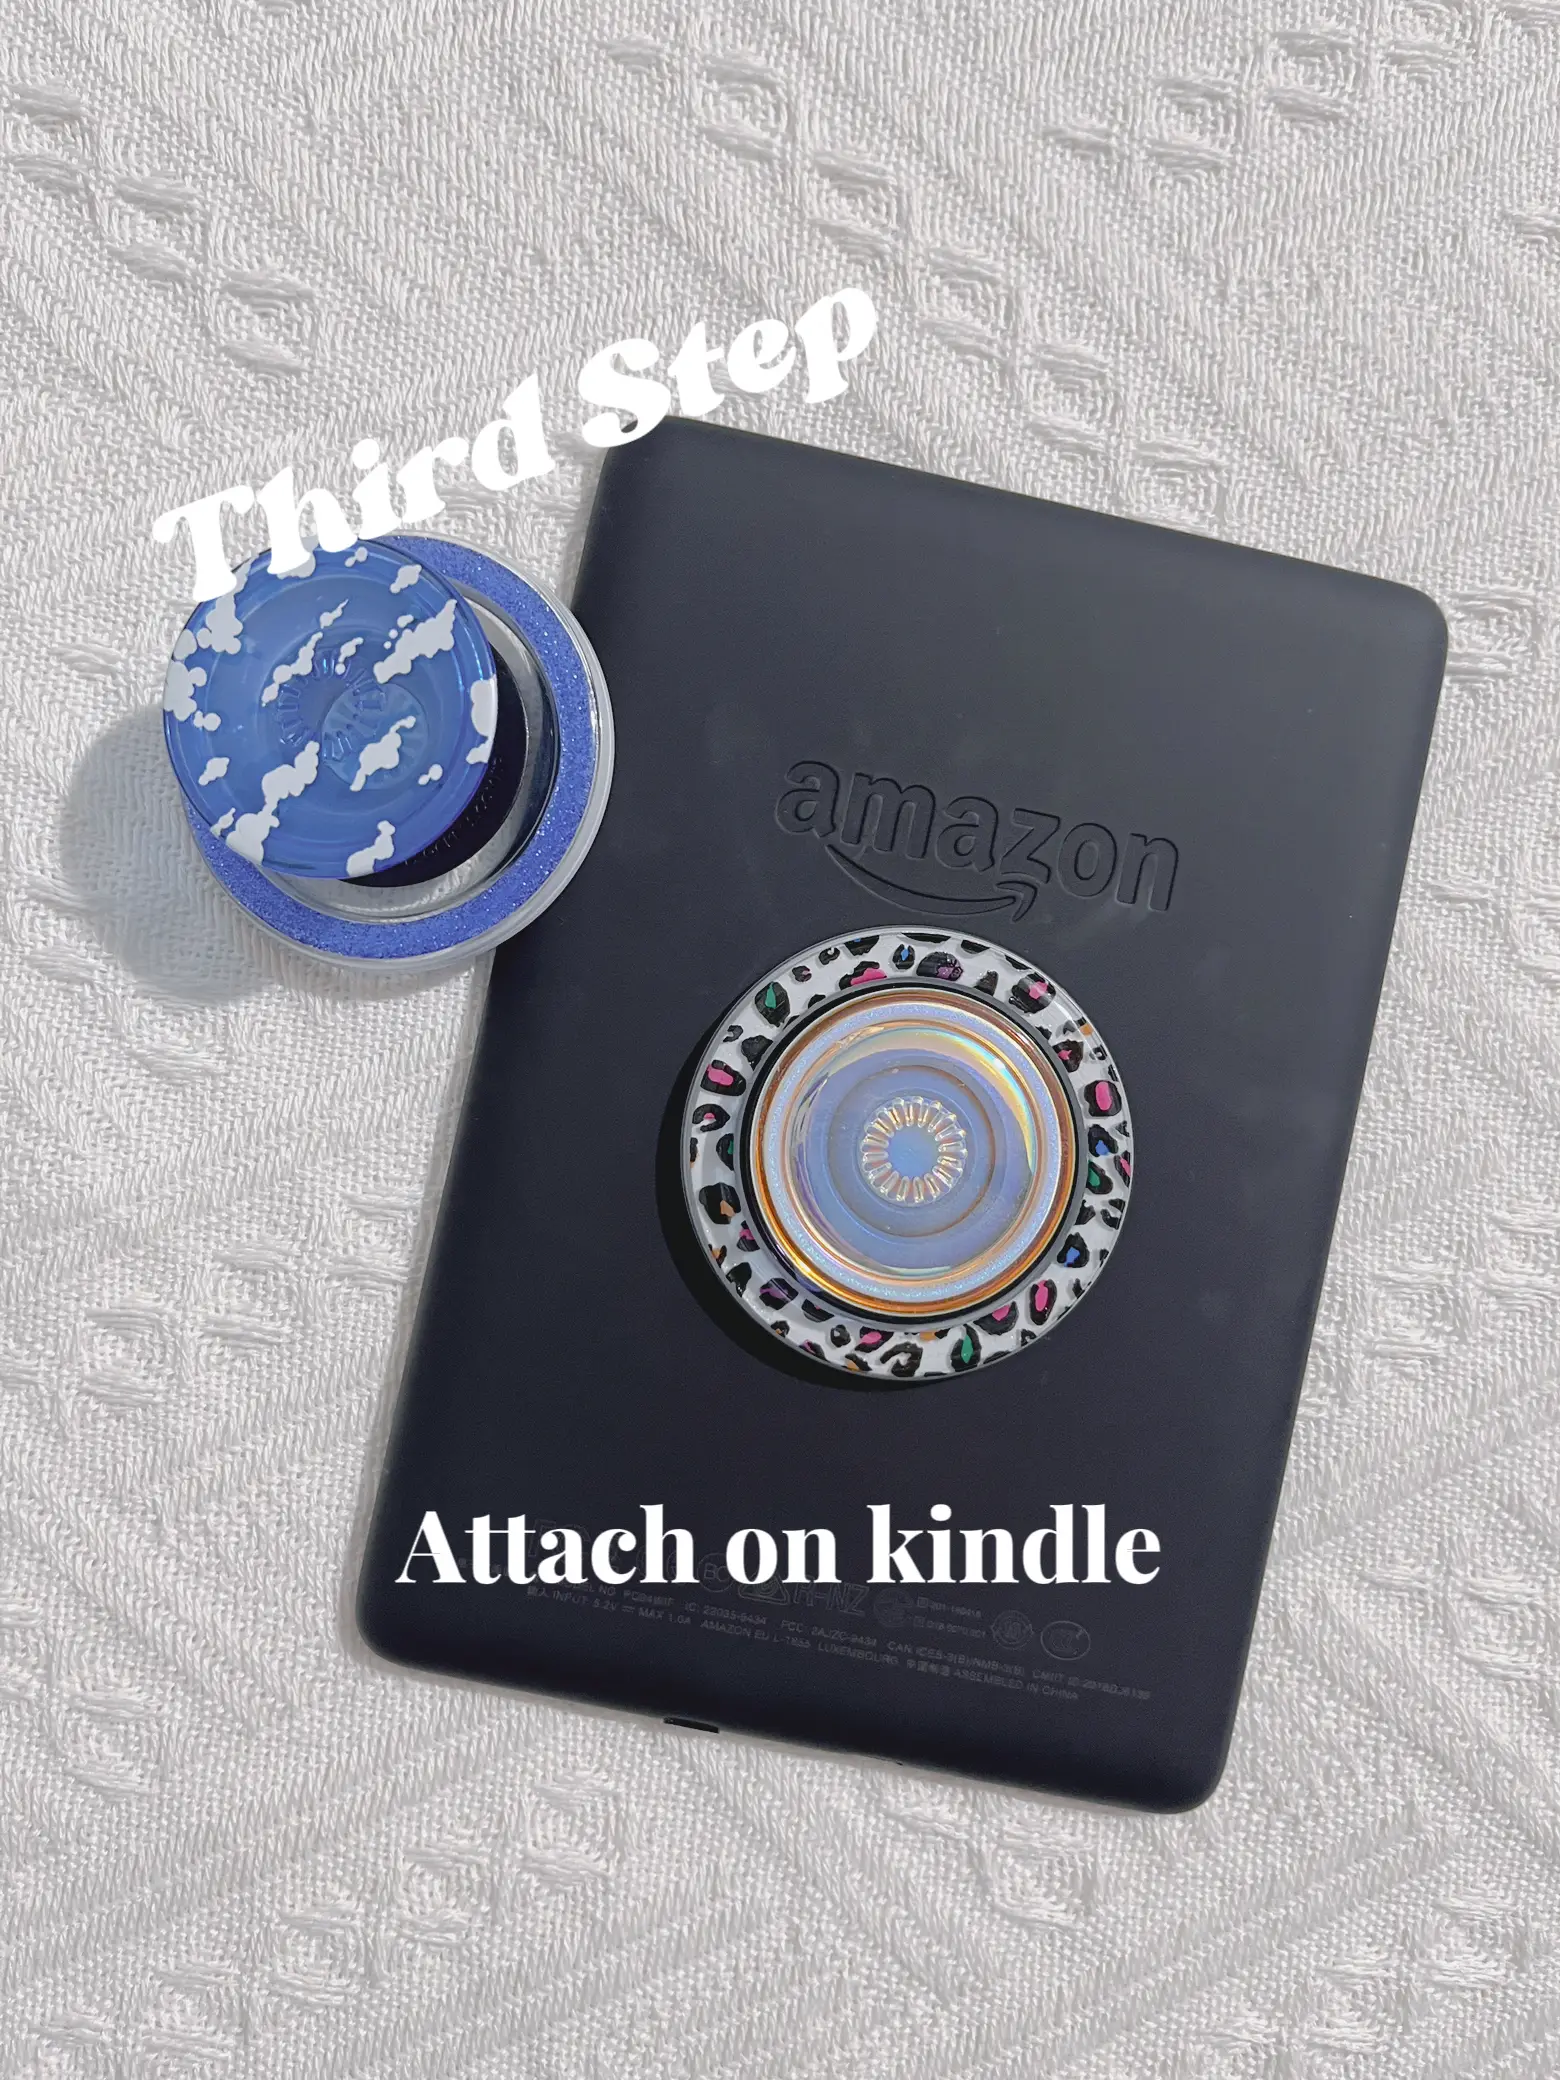 Replying to @aliiannaaaa The most adorable popsocket for your Kindle!